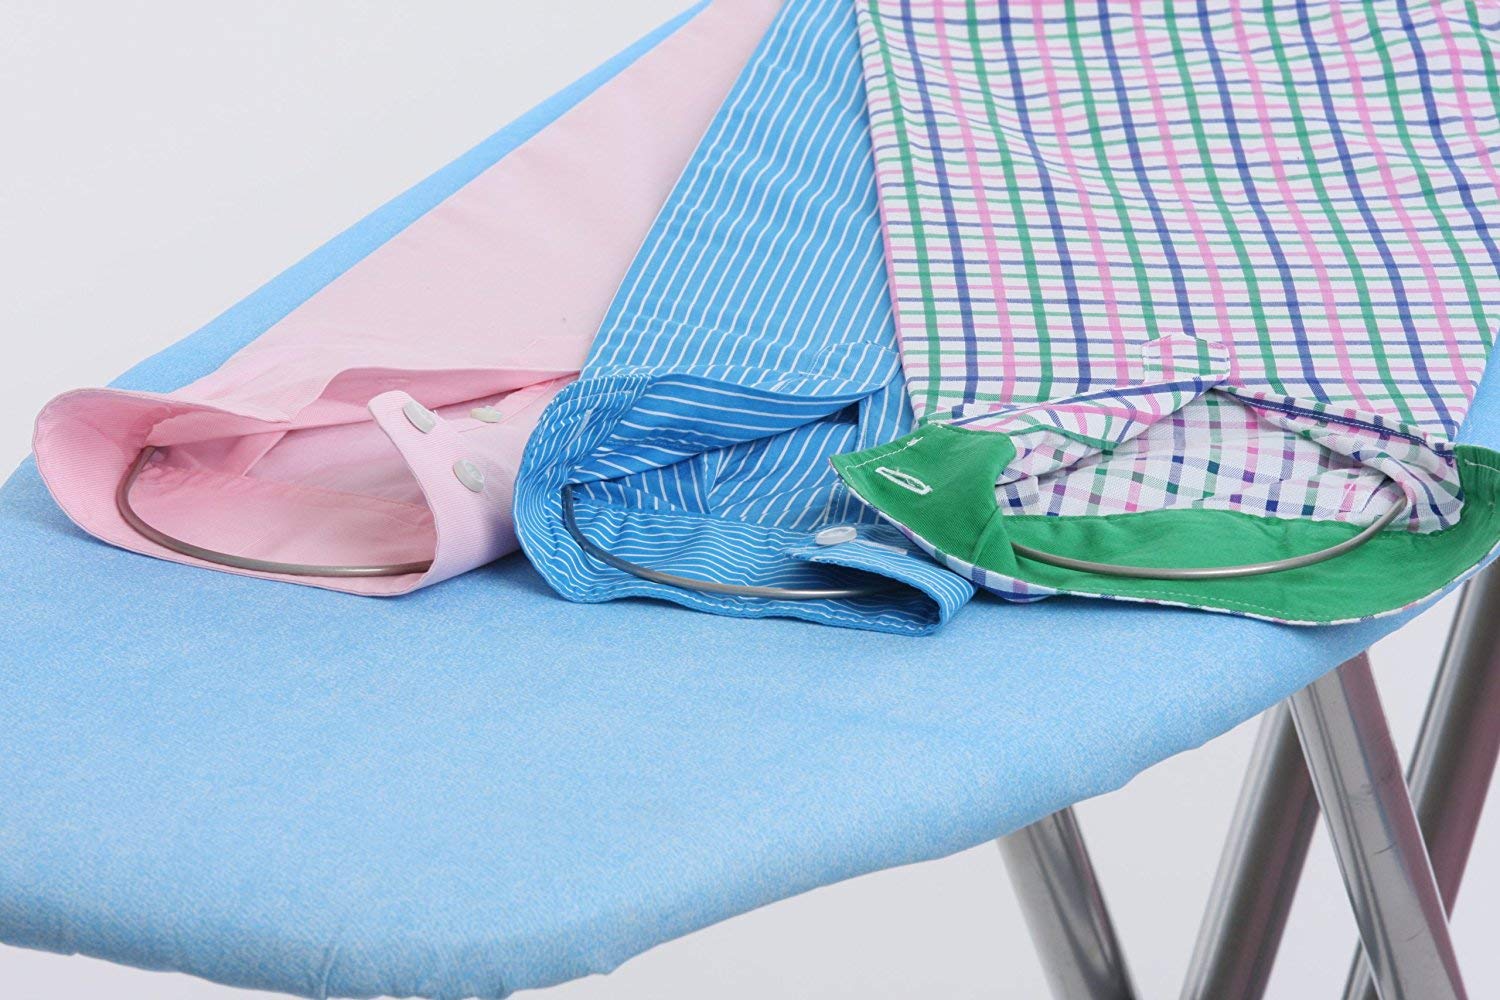 Perfect Sleeve Ironing Assistant for Wrinkle-Free Shirt Sleeves